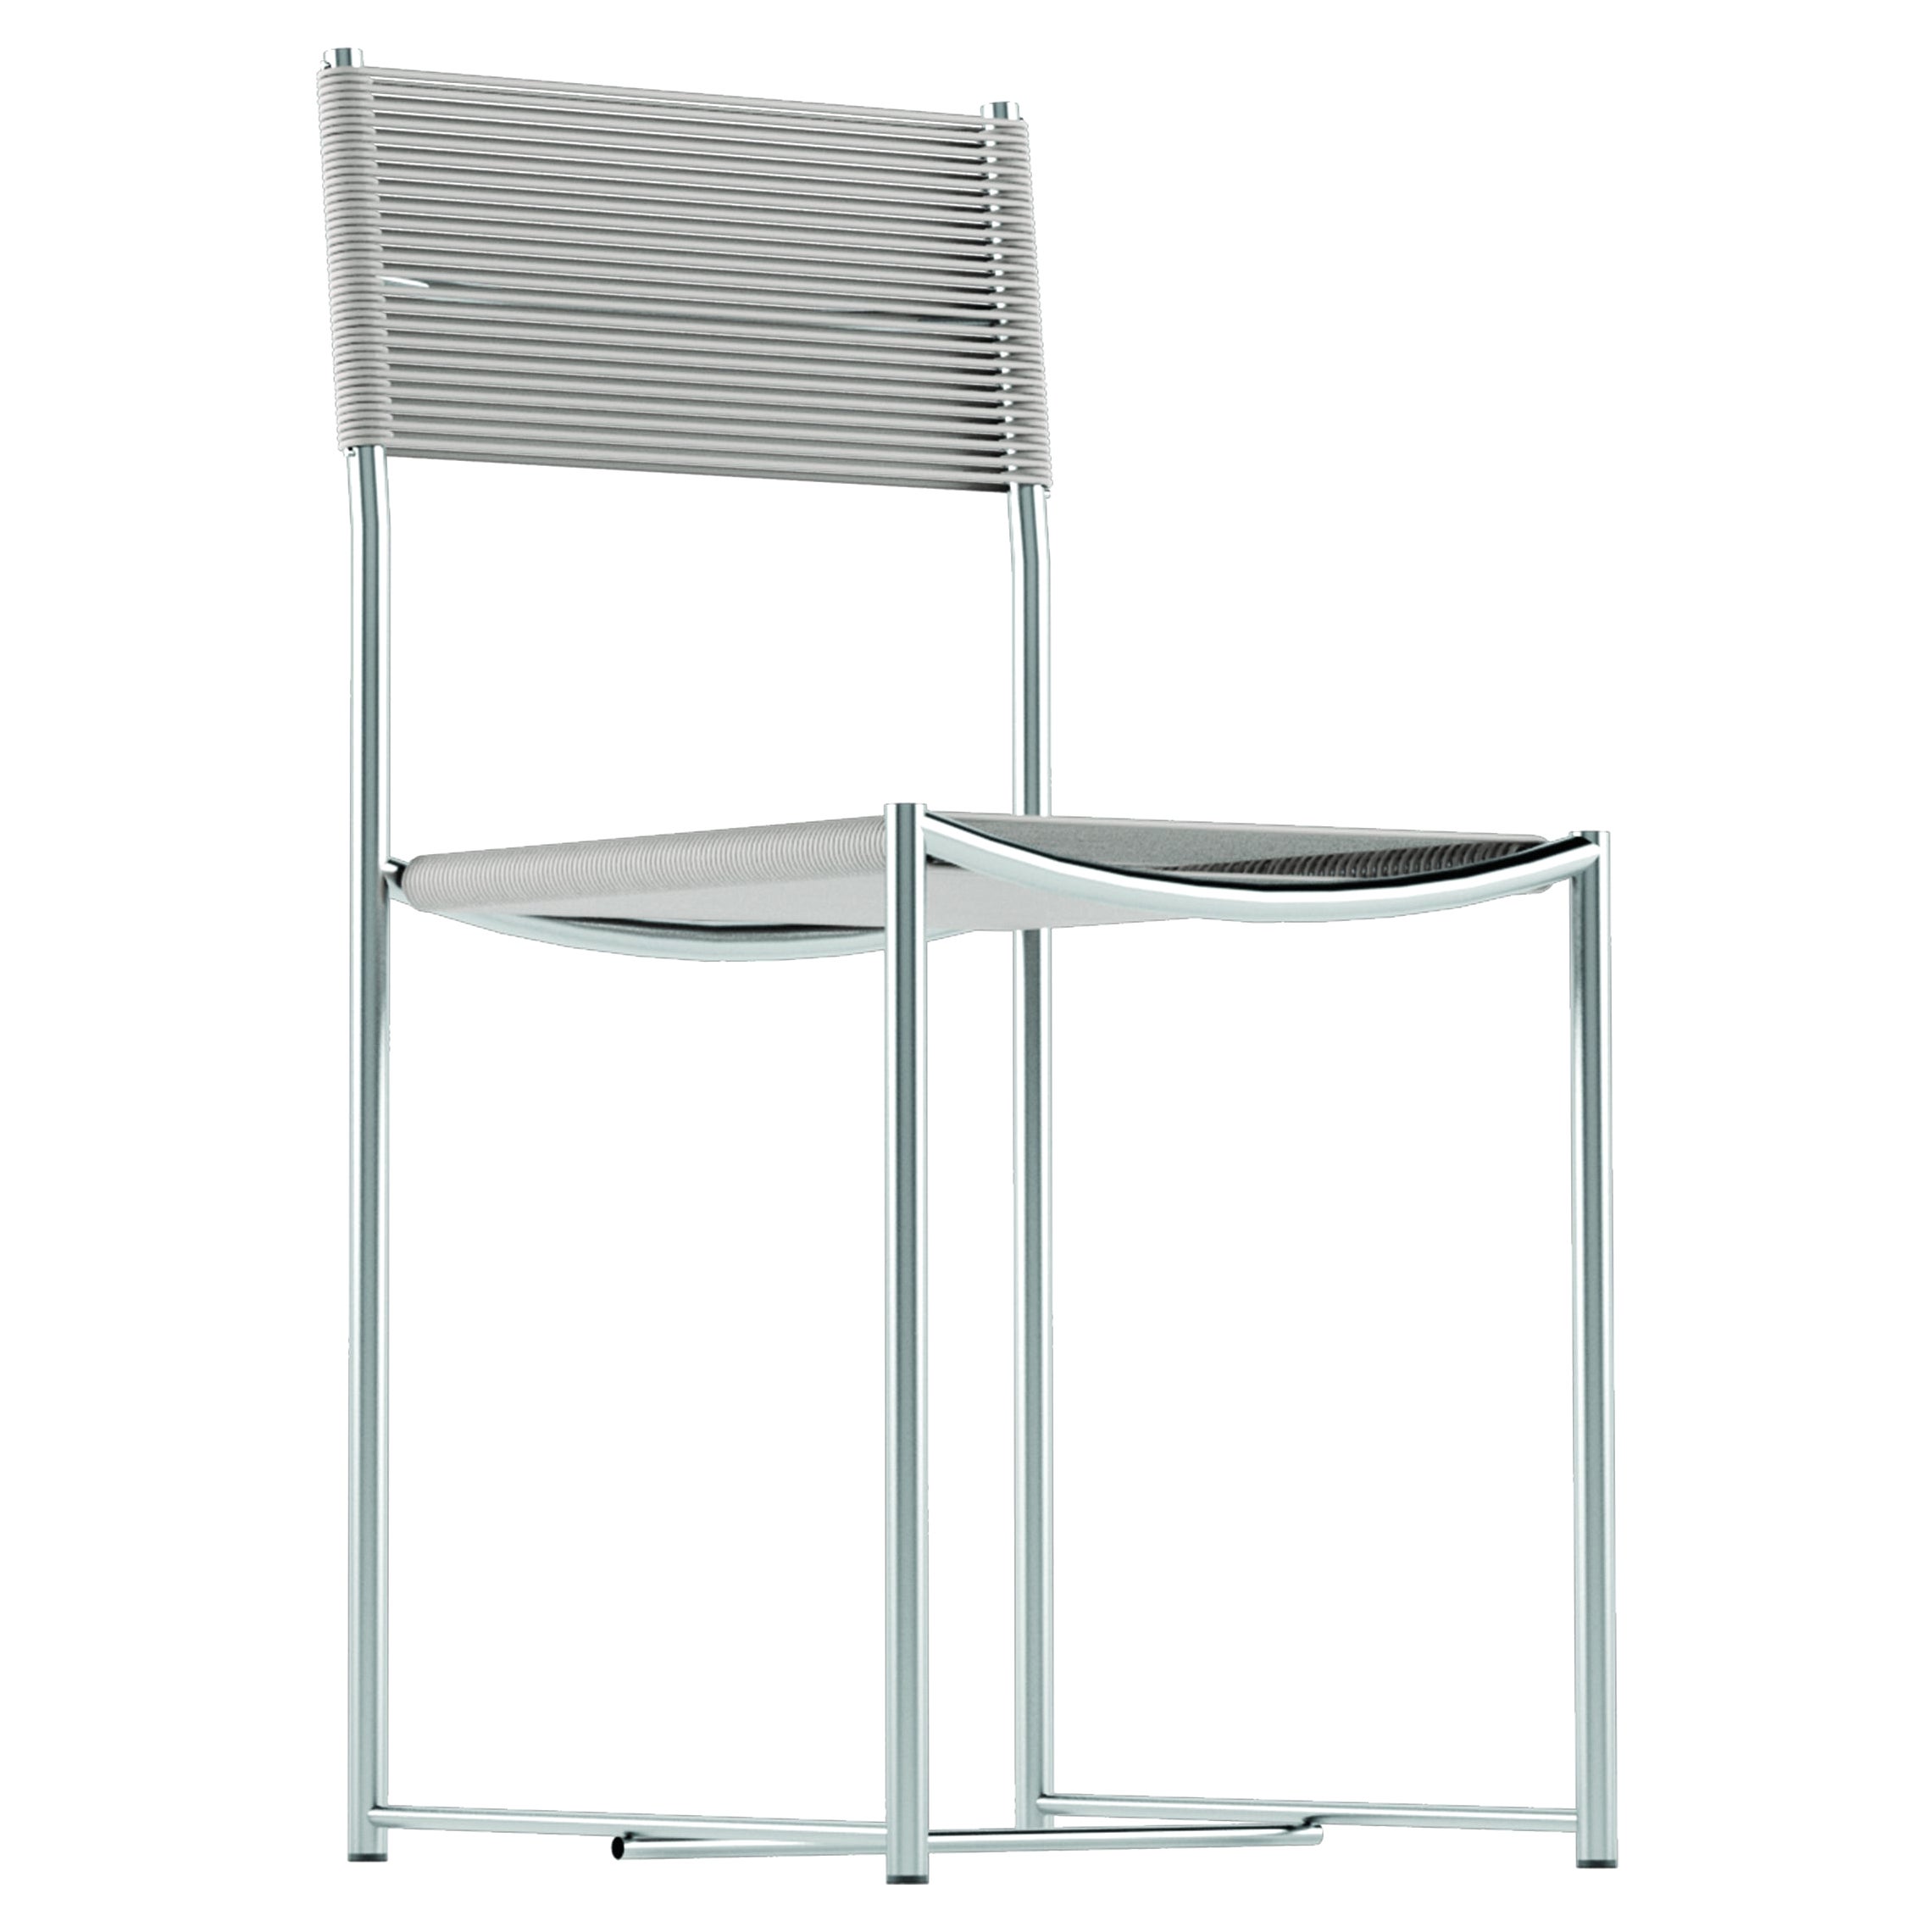 Alias 101 Spaghetti Chair with Beige PVC Seat and Chromed Steel Frame